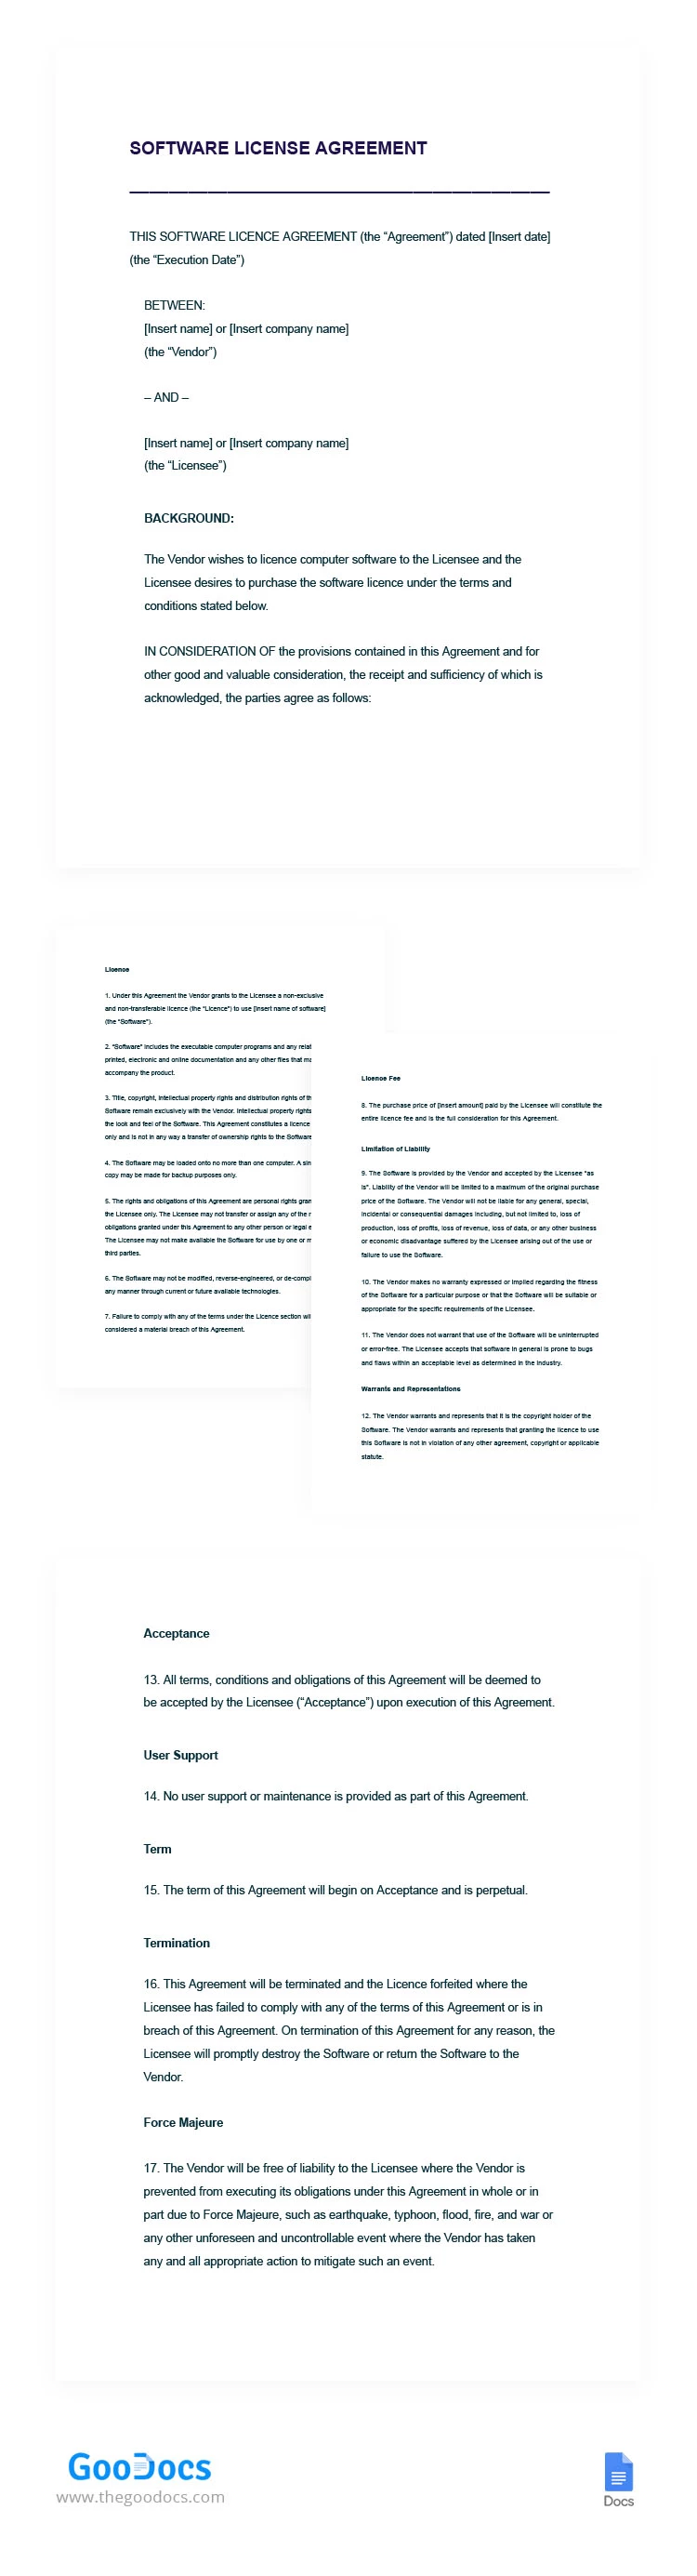 Software License Agreement - free Google Docs Template - 10066523